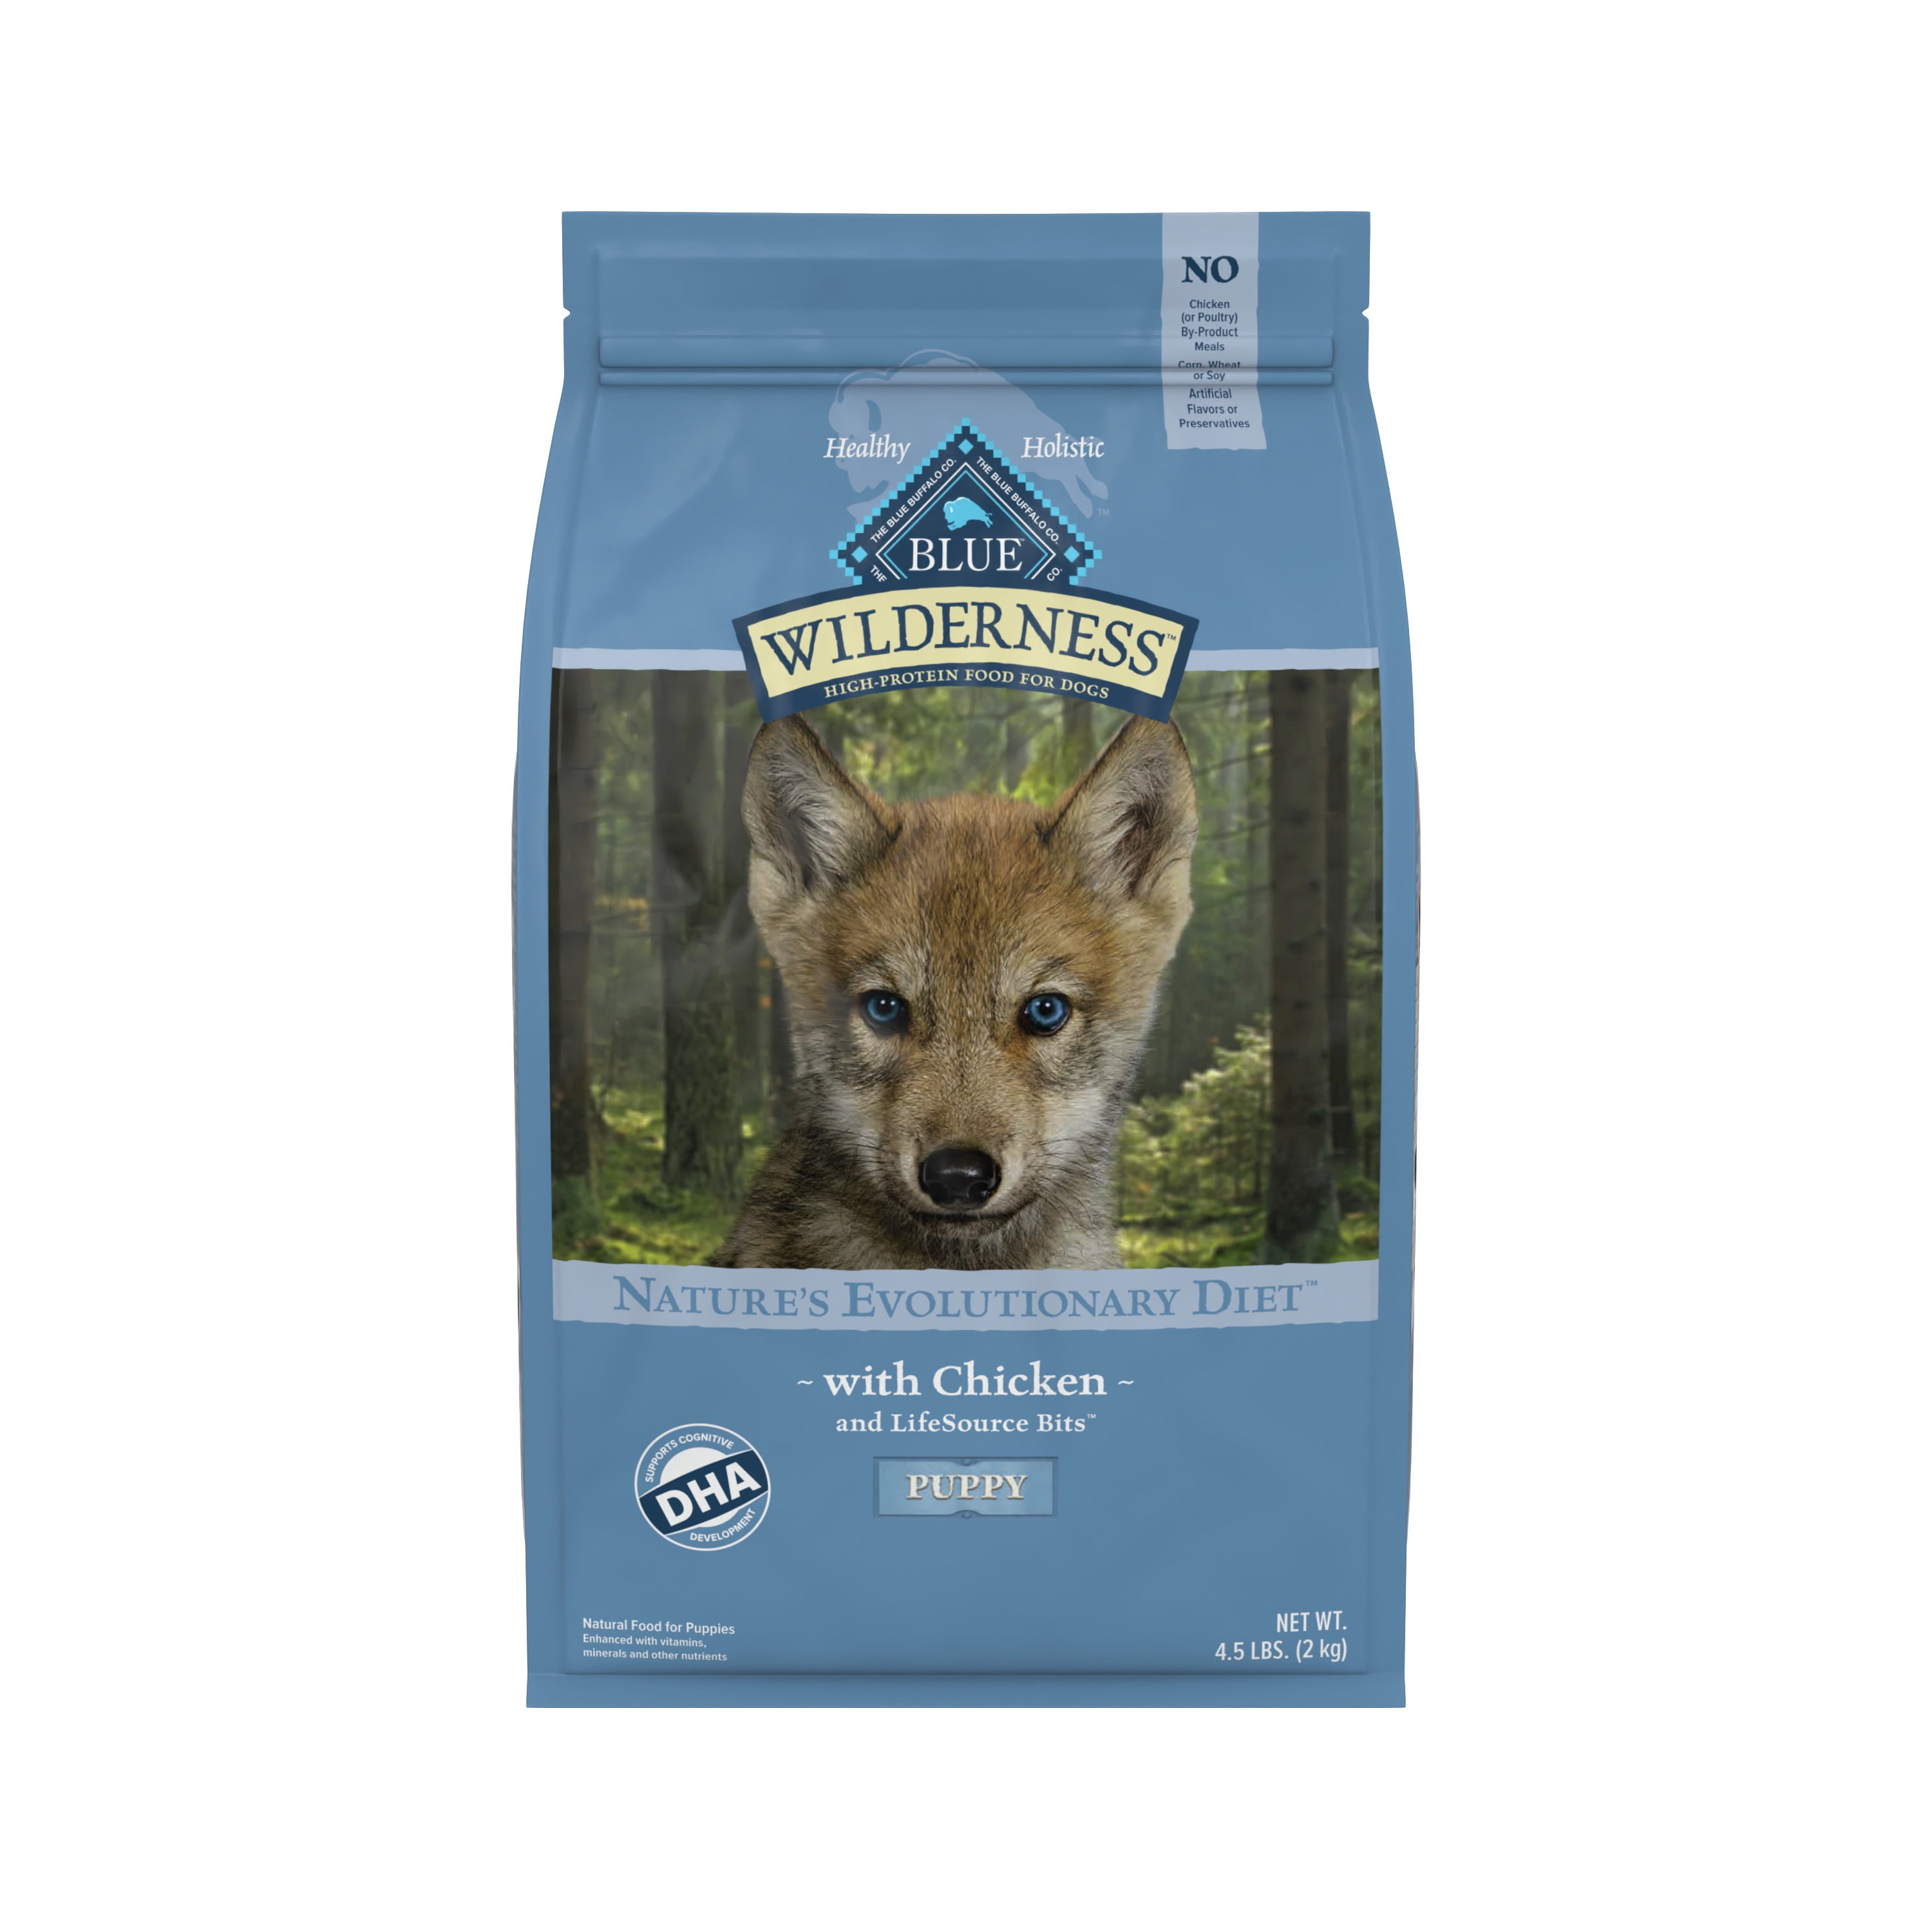 Blue Buffalo Wilderness High Protein Chicken Dry Dog Food for Puppies, Grain-Free, 4.5 lb. Bag